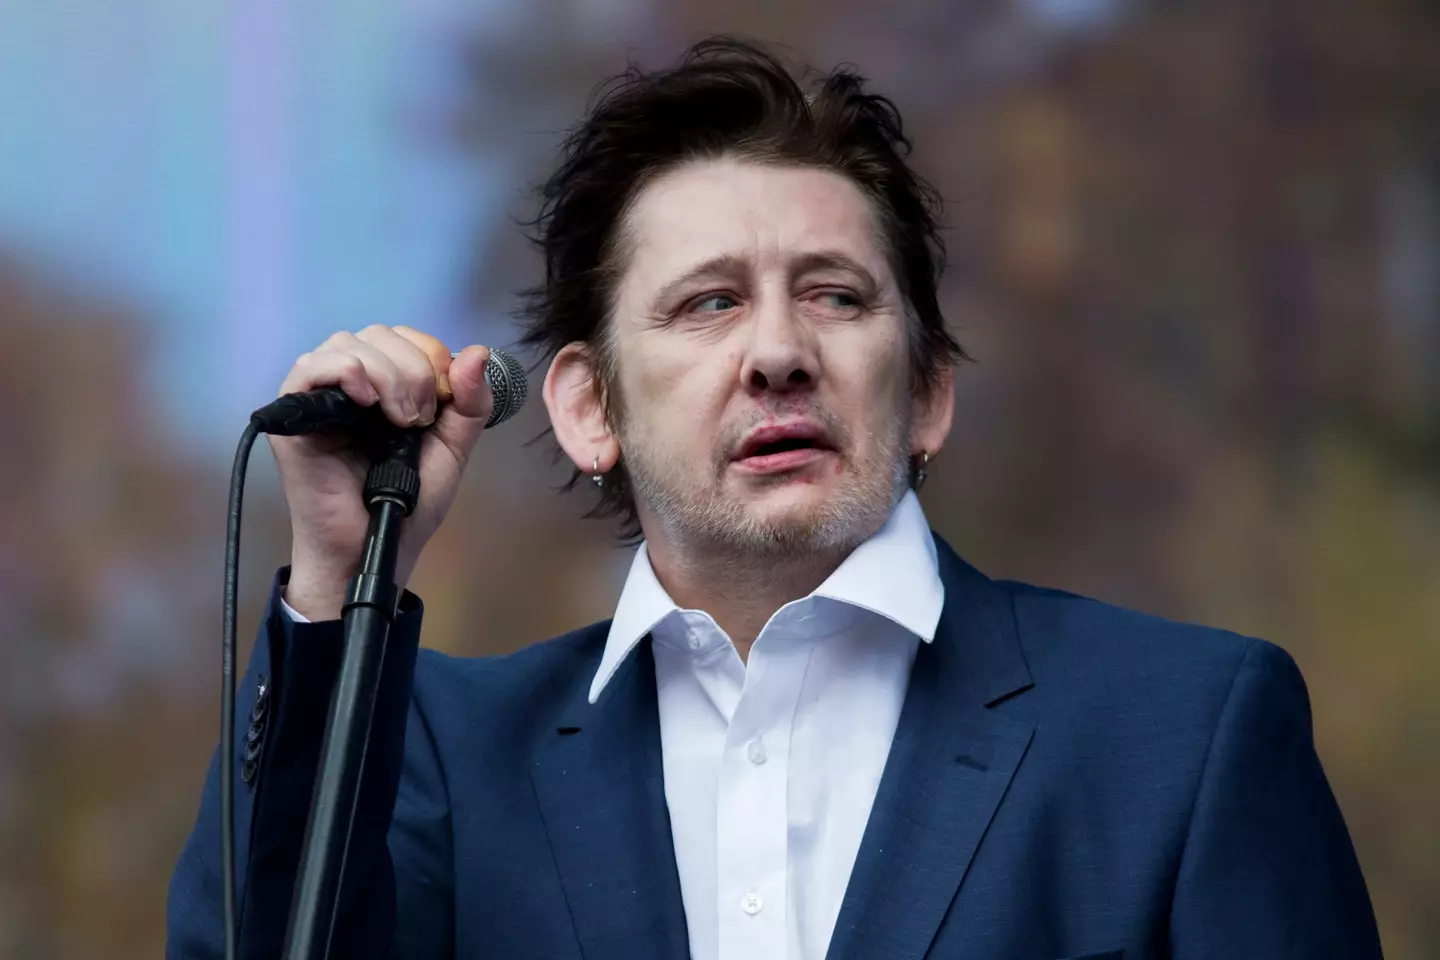 MacGowan was lead singer of The Pogues.